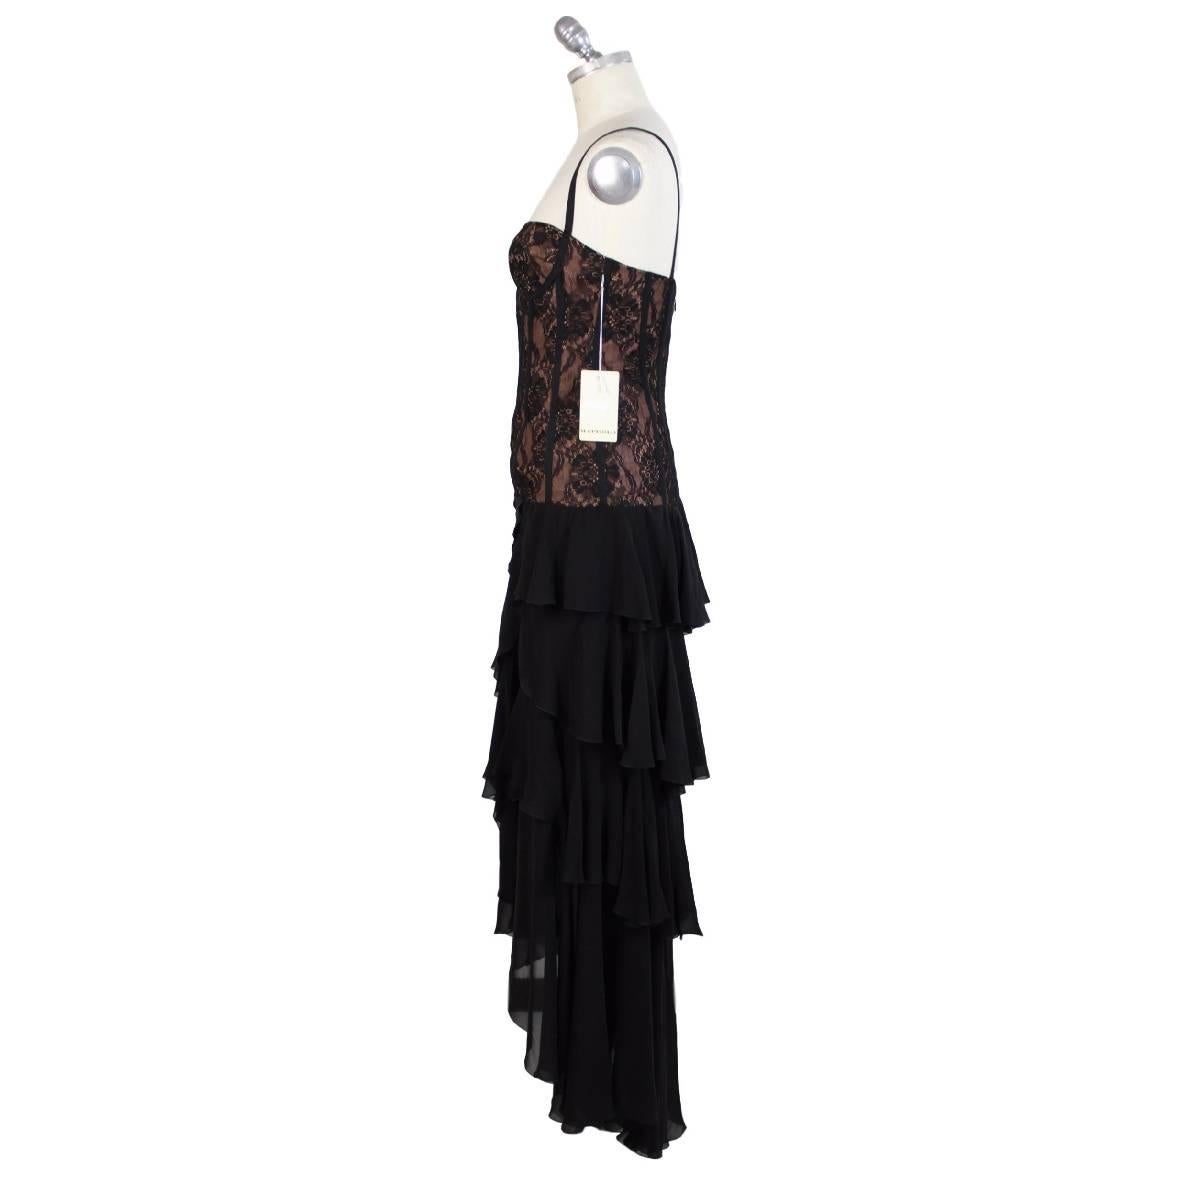 Gai Mattiolo long evening dress in soft silk with lace sleeveless bodice, corset lined with rose-colored slats, longest long draped skirt behind, it size 42, made in Italy, new clothes with tags.

Size 42 (IT); 8 US; 10 UK

Measures
Shoulder: